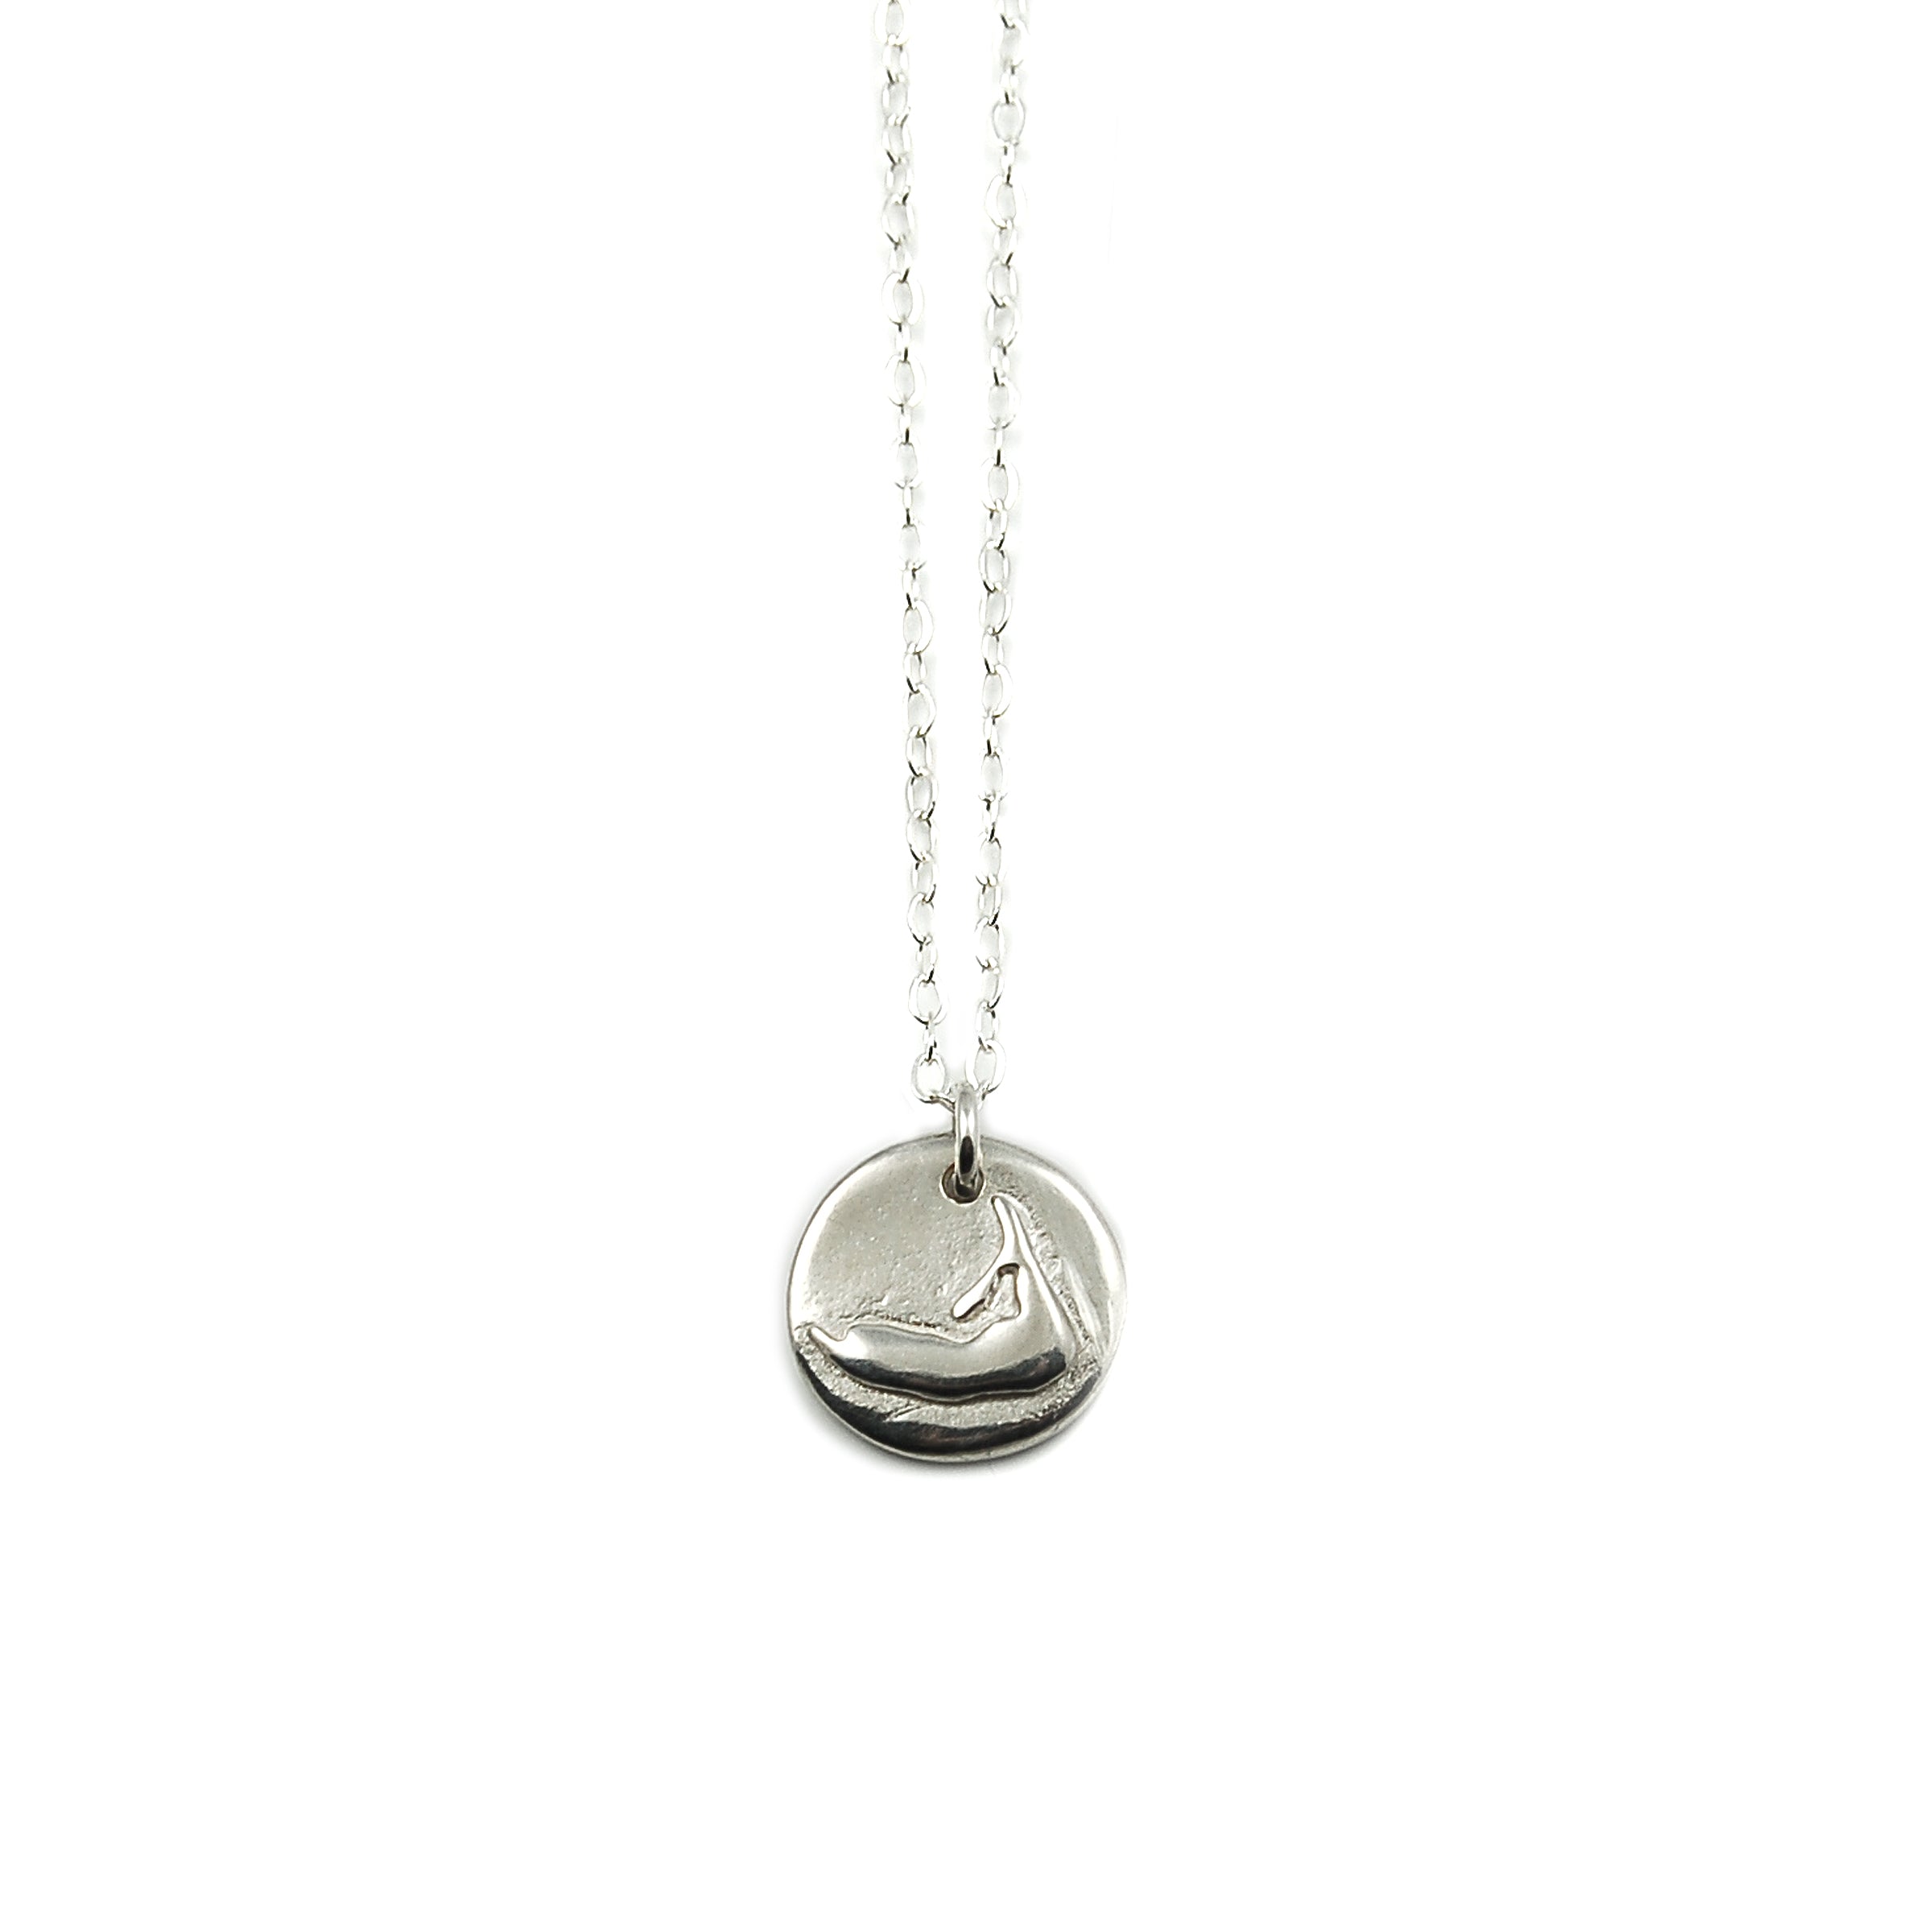 Nantucket Great Point Necklace ©